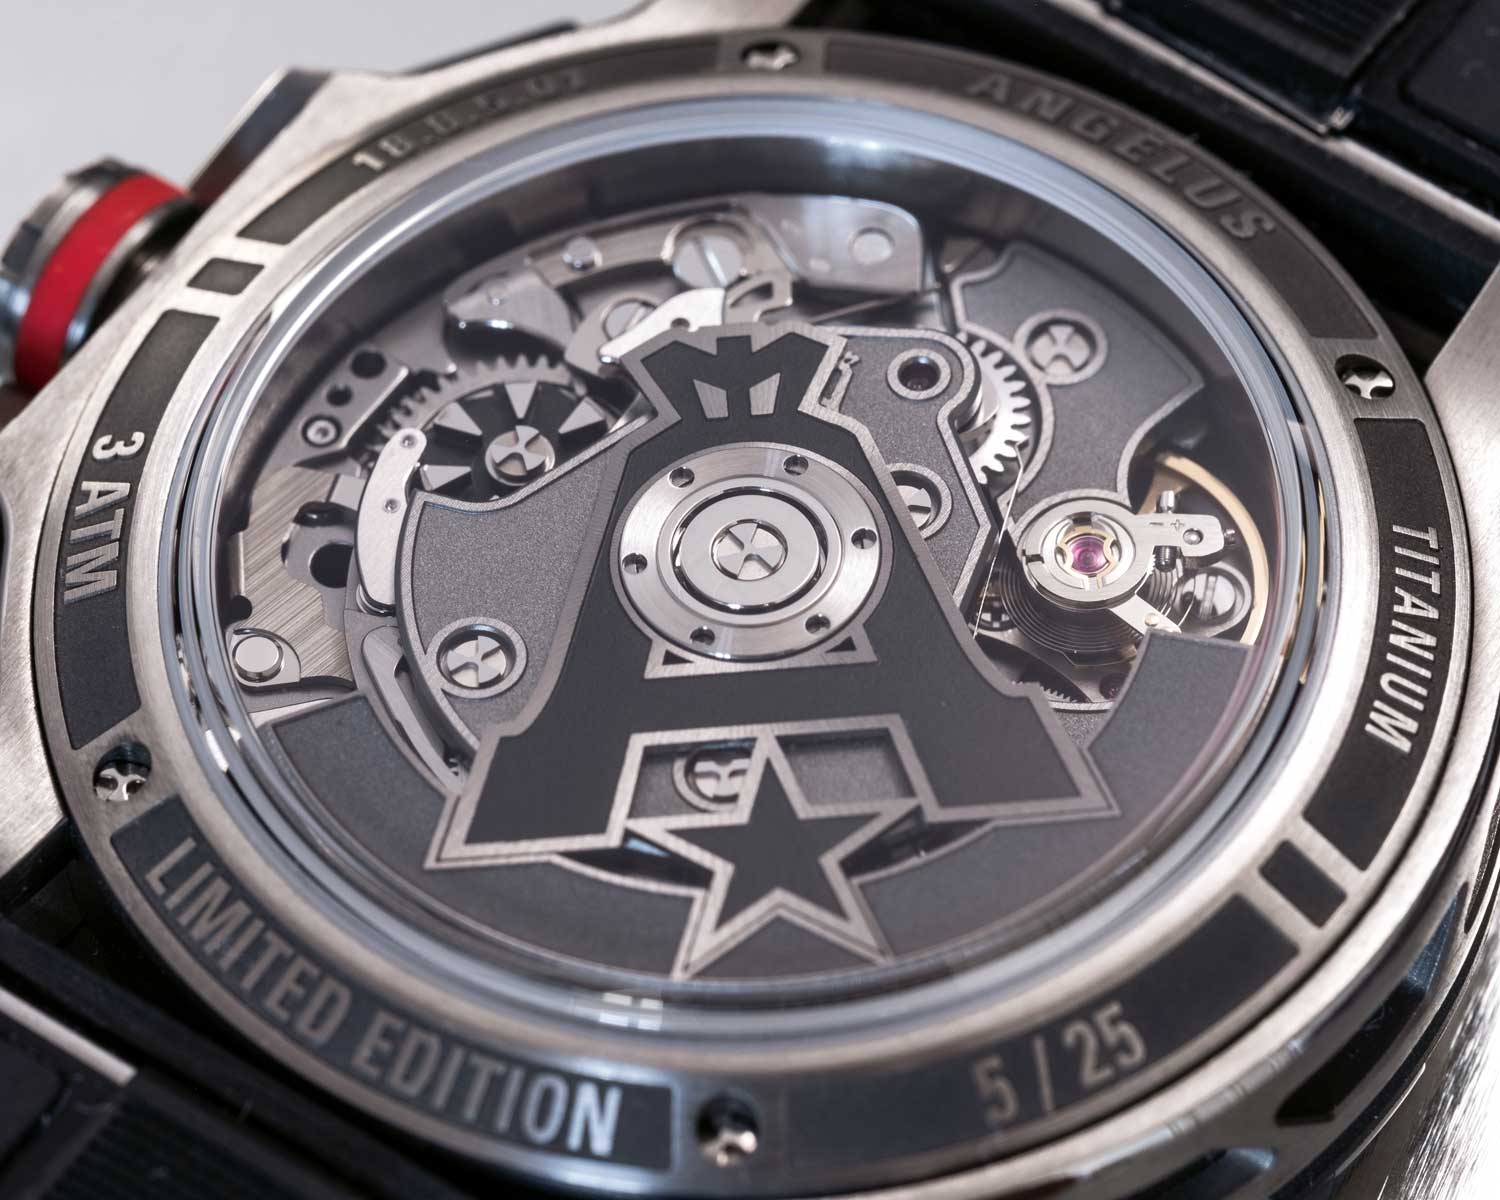 Angelus’ star logo, ensuring that this watch is identifiable even in the dark